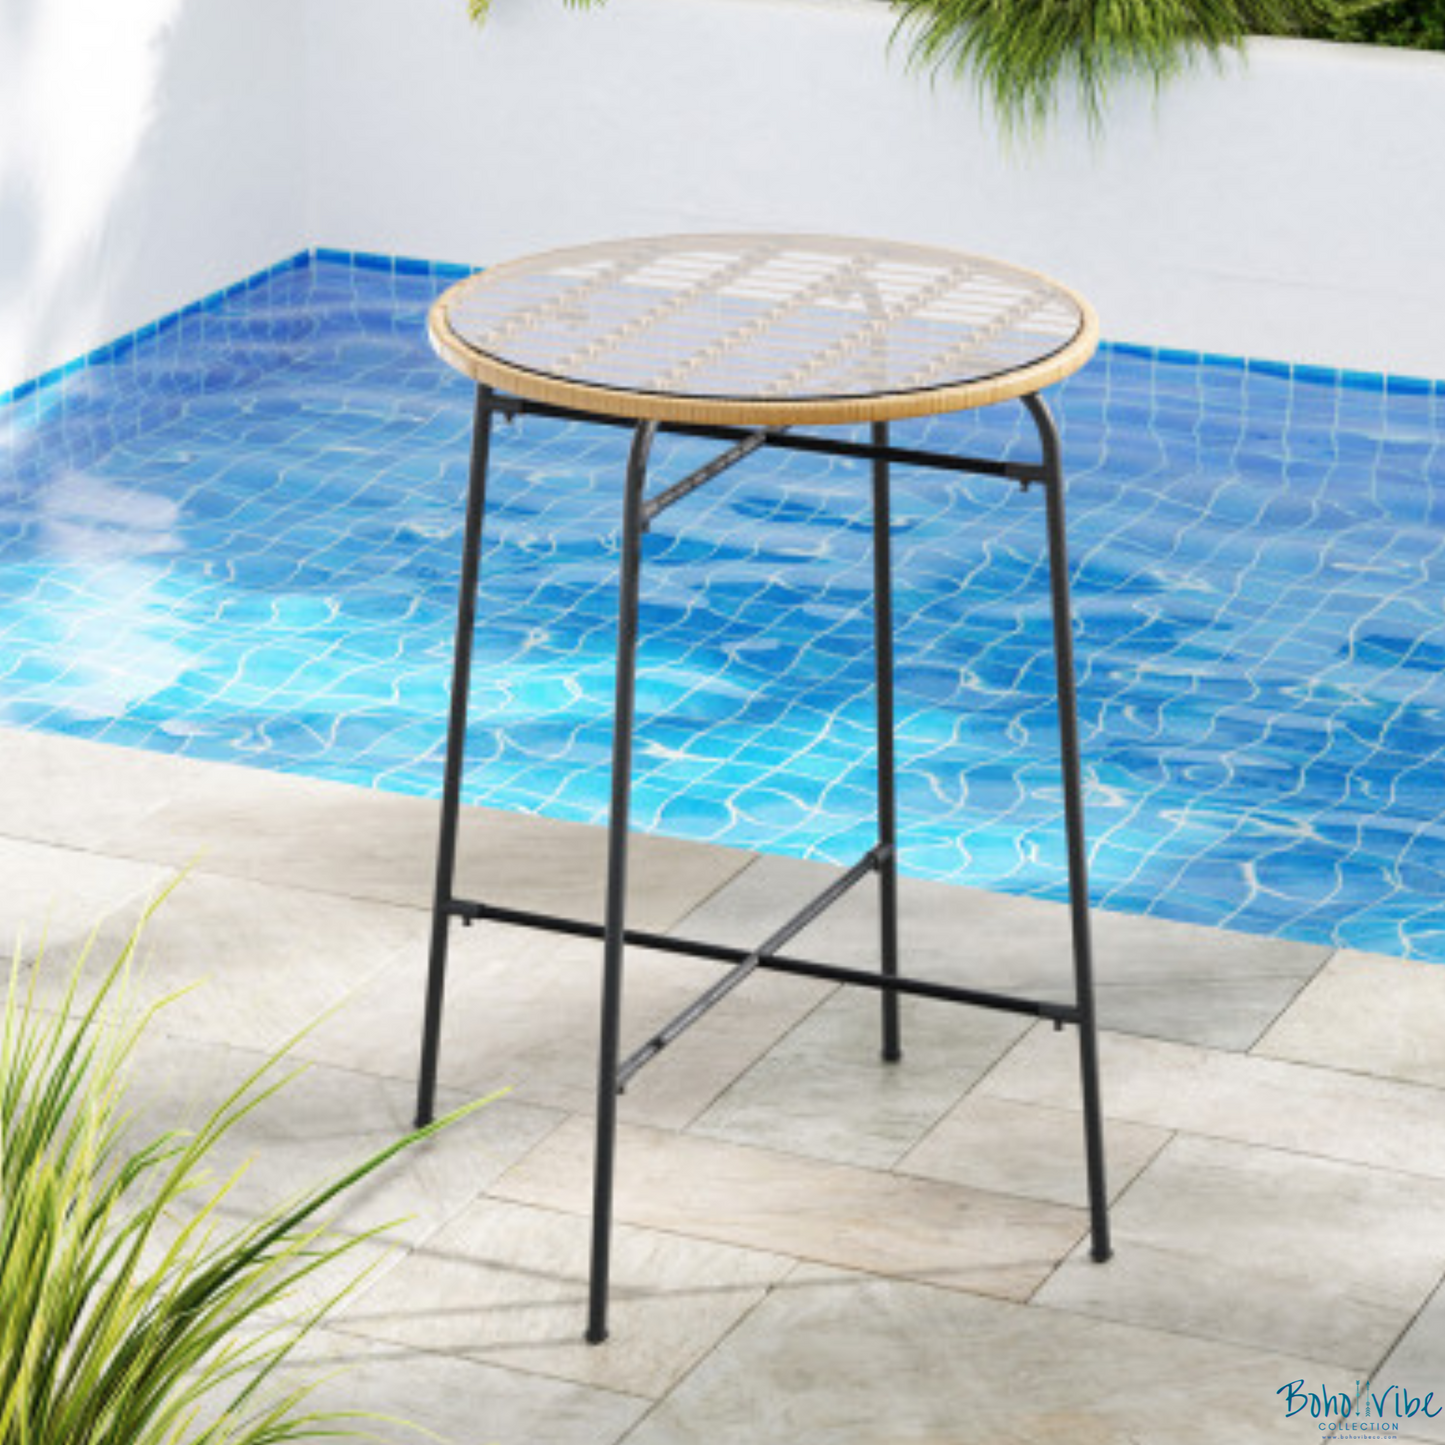 Boho ↡↟ Vibe Collection ↠ Wicker Bar Table Stylish Glass Outdoor Patio Dining 